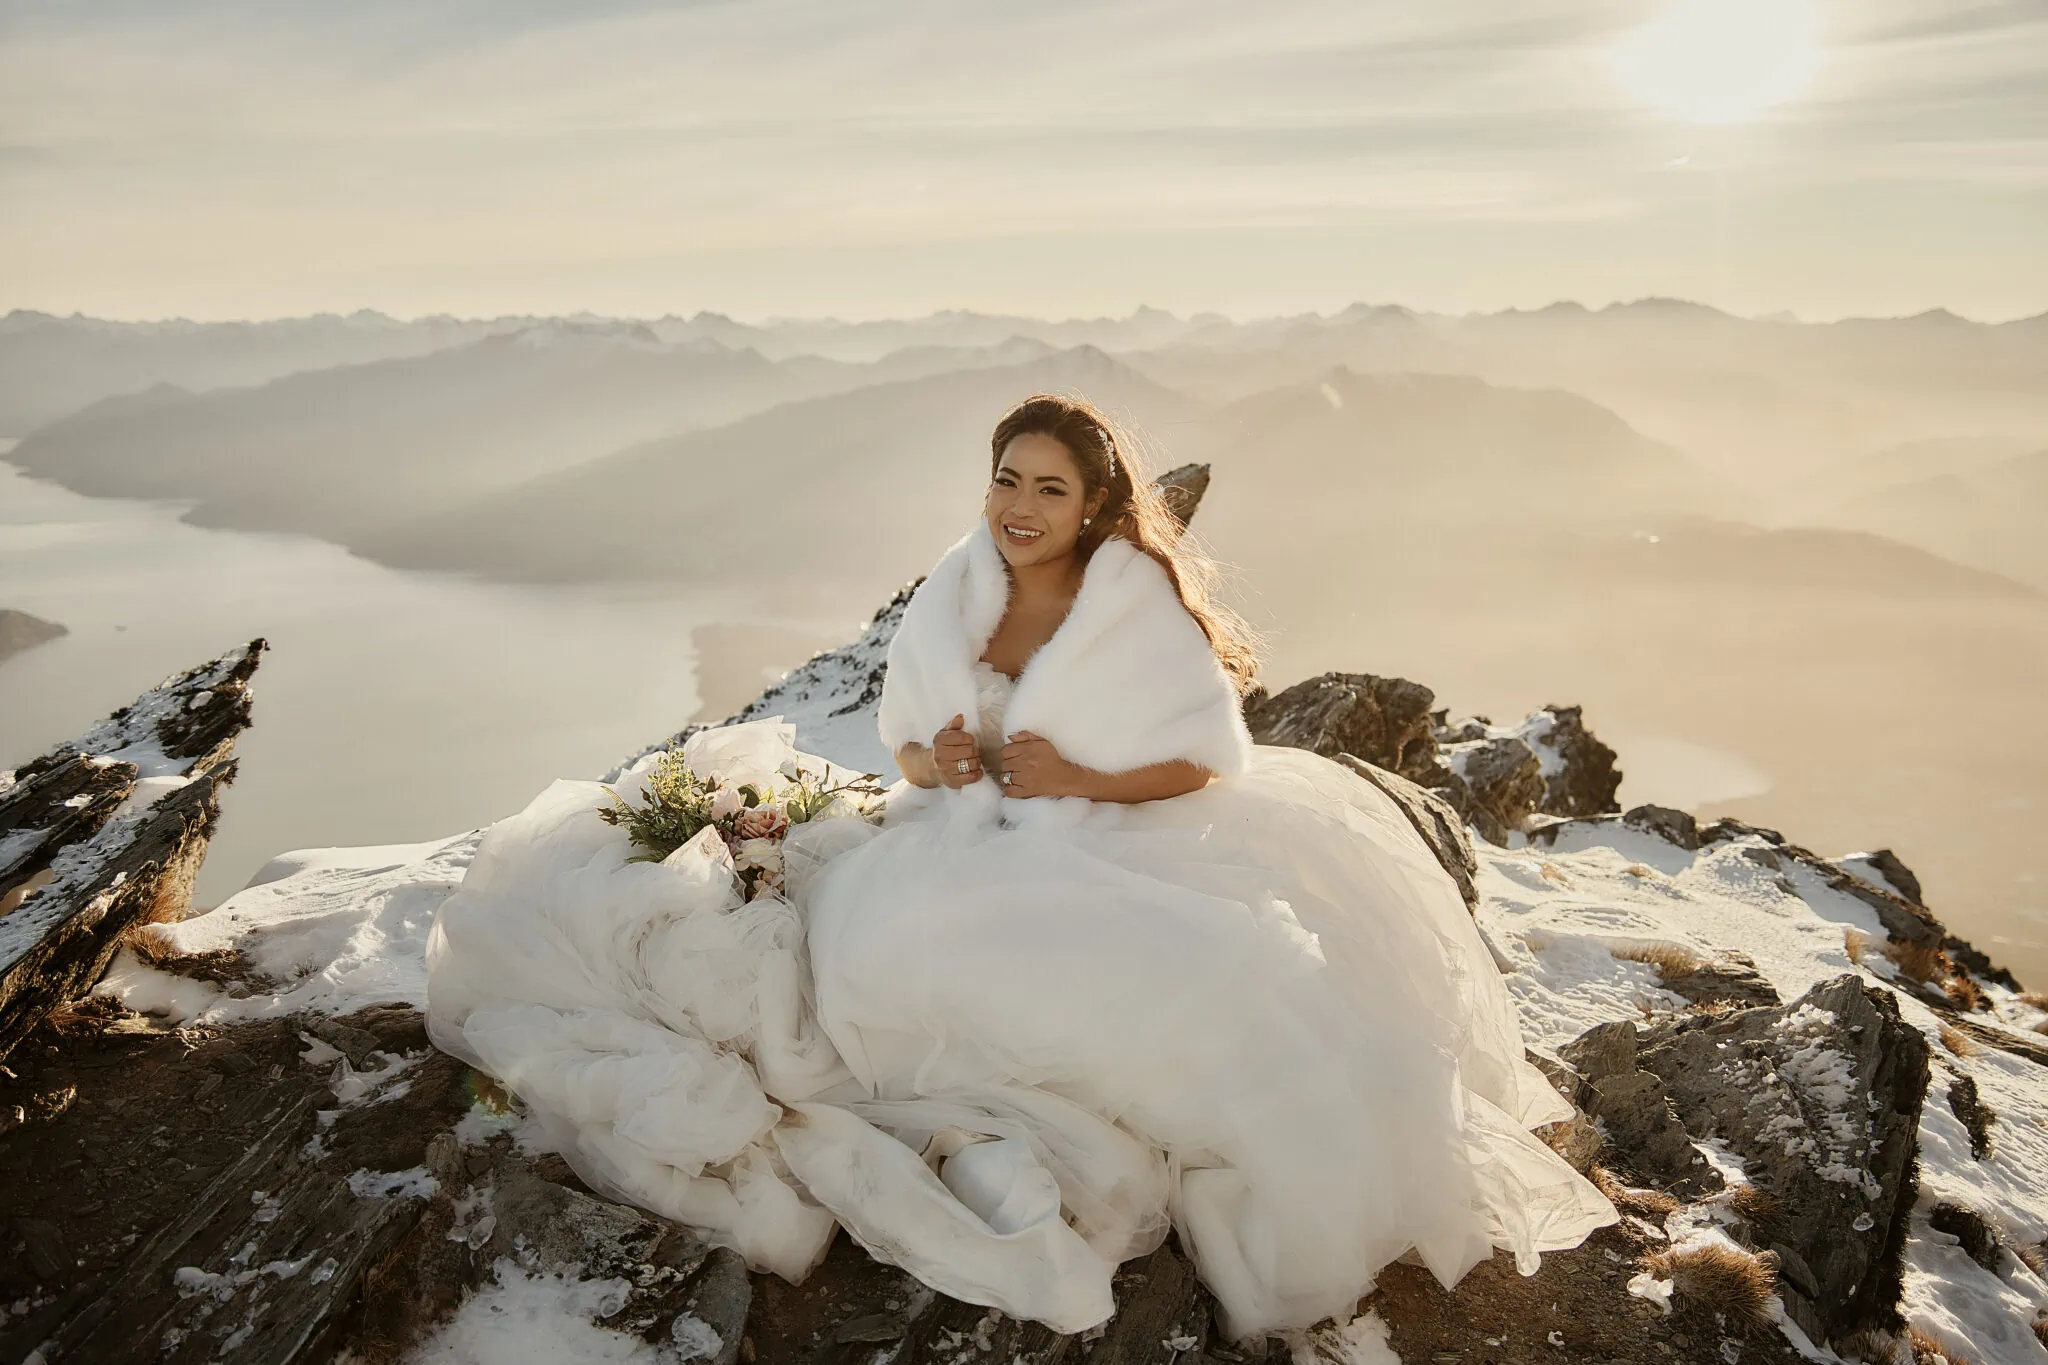 Queenstown New Zealand Elopement Wedding Photographer - Amy and Callum capture stunning pre-wedding moments as they sit atop a picturesque mountain in Queenstown, adorned in a white dress.